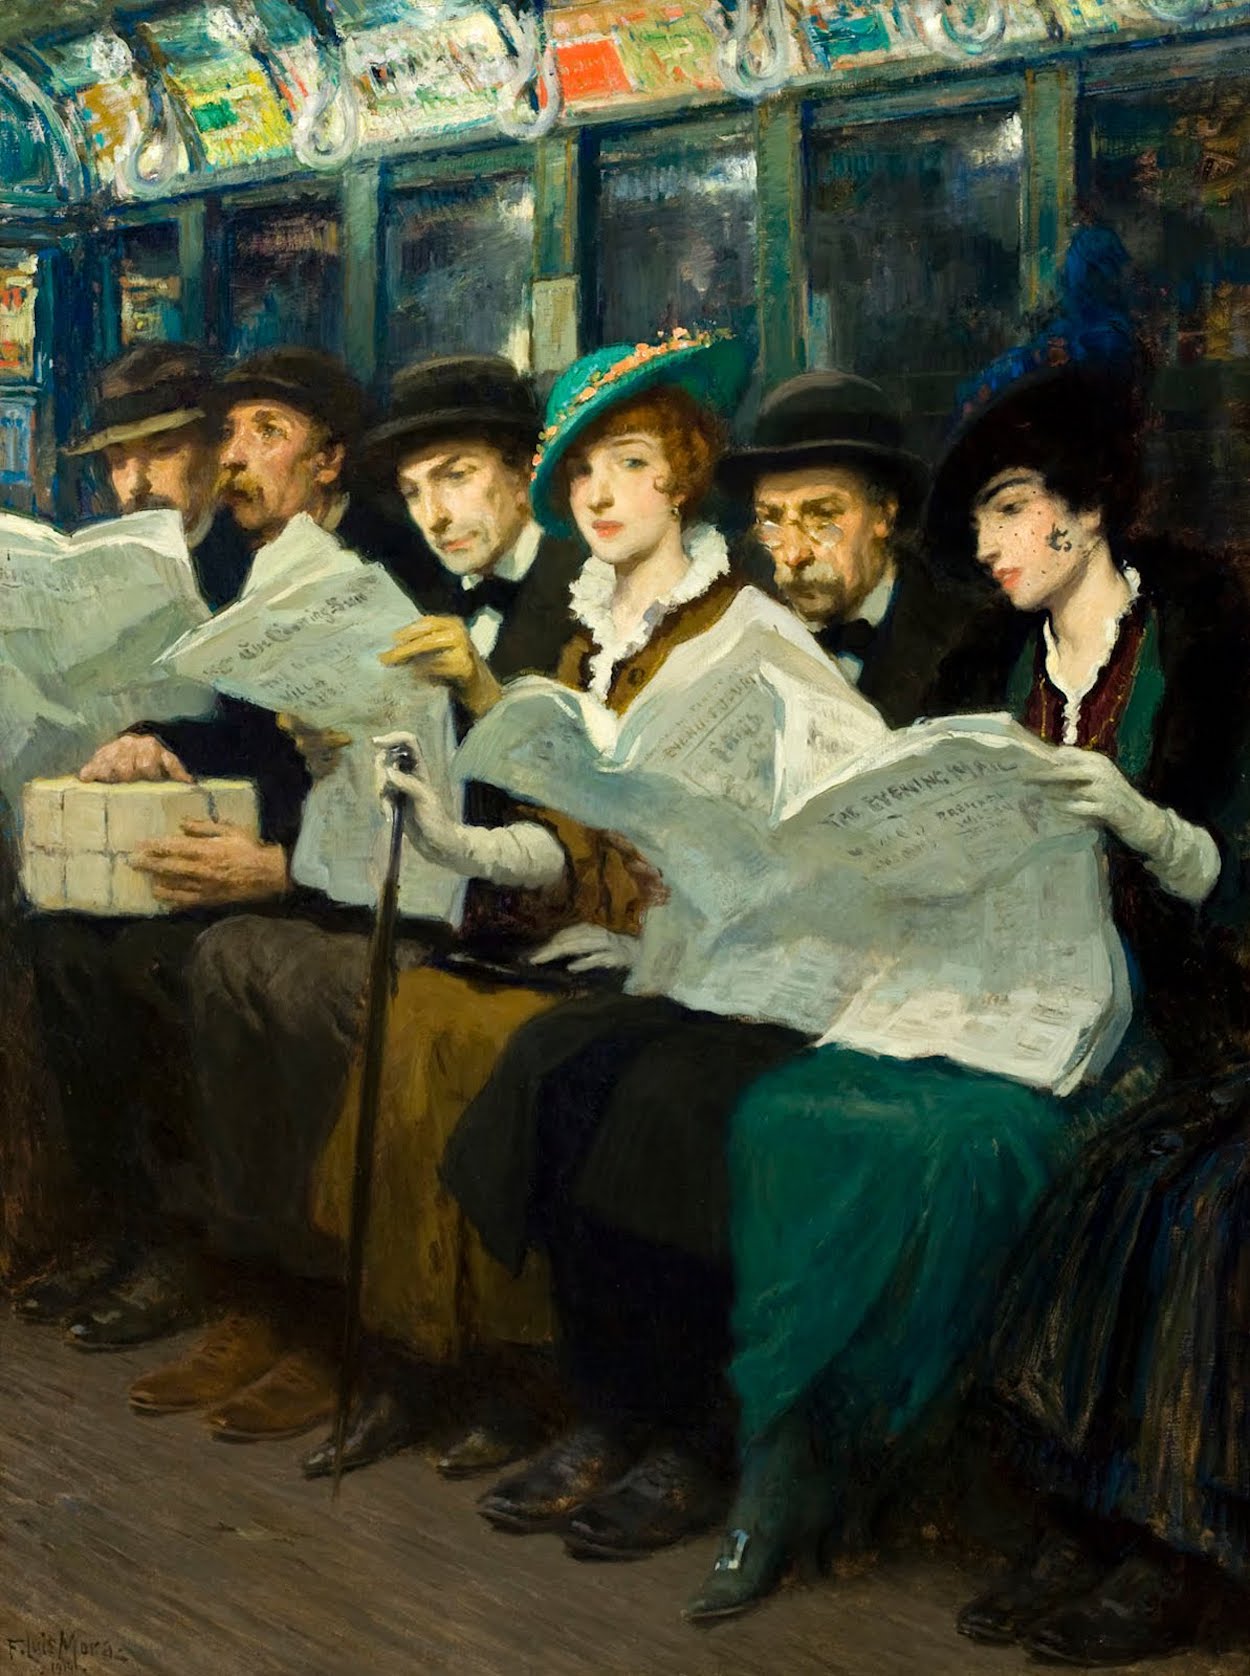 Subway Riders in NYC by F. Luis Mora - 1914 The New York Public Library